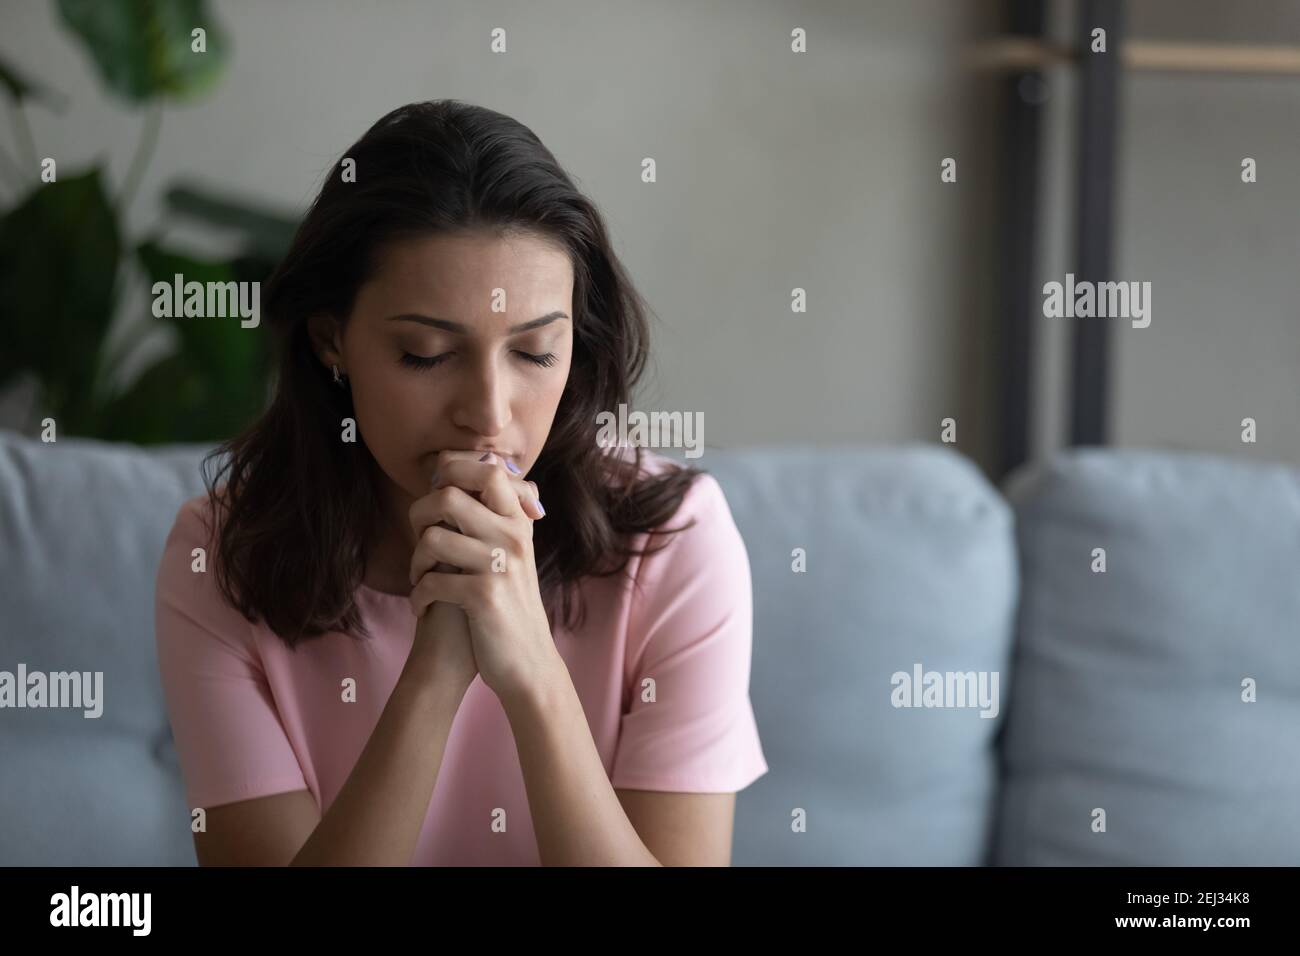 Worried young arabian woman praying god trying to concentrate Stock Photo